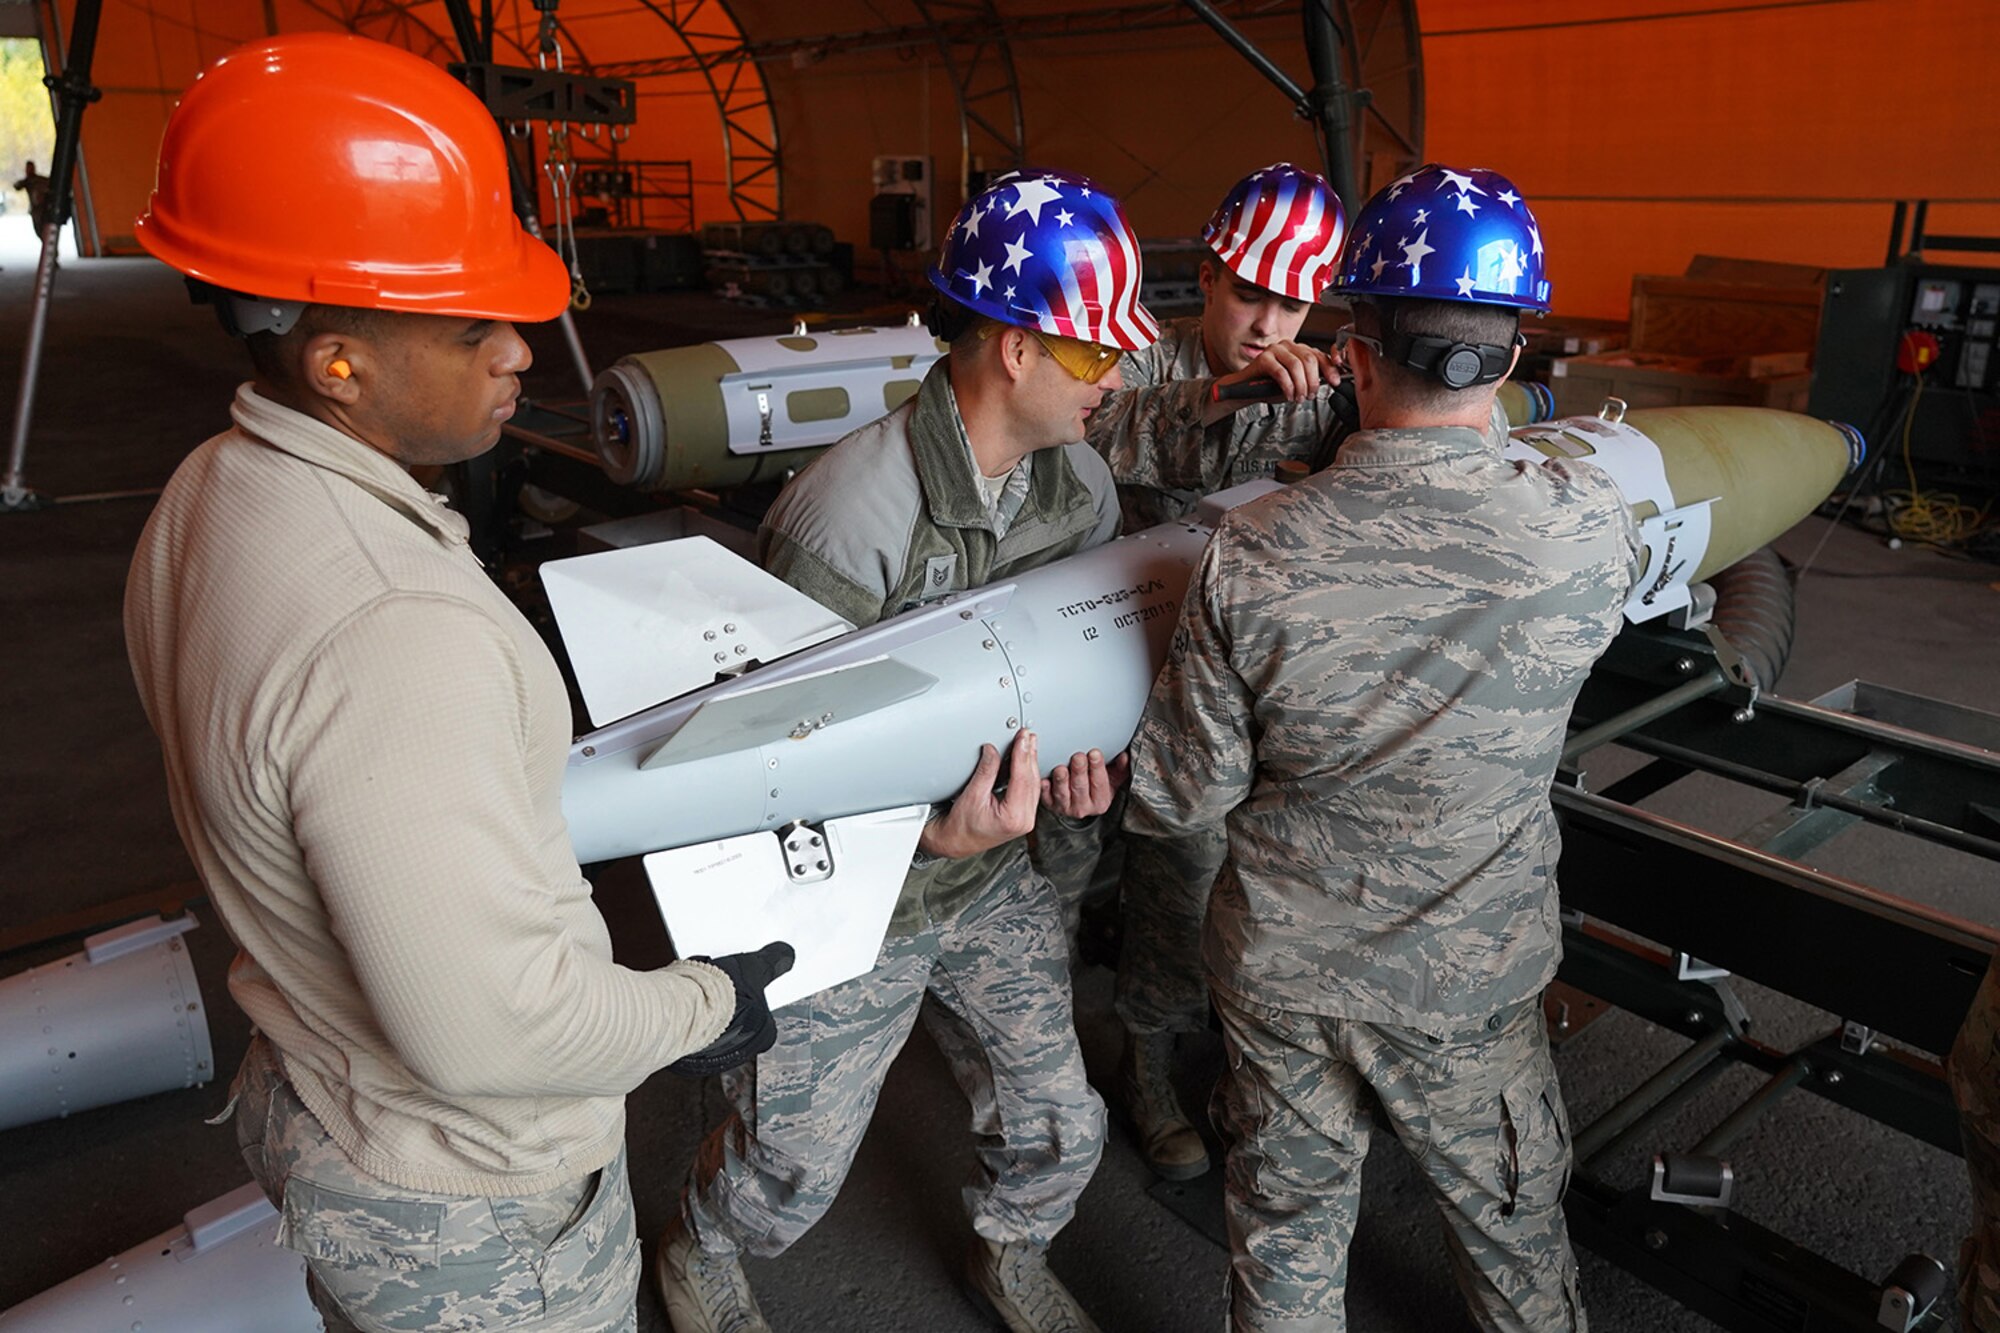 Airmen assigned to the 3rd Munitions Squadron build GBU-32s (Guided Bomb Units) on Joint Base Elmendorf-Richardson, Alaska, Oct. 2, 2019, while participating in the Polar Force 20-1 exercise. Polar Force 20-1 is designed to exercise multiple elements of the Agile Combat Employment (ACE) concept of operations, which include generating 5th Generation combat power from austere locations, command and control using non-traditional methods, and rapid airlift capabilities to sustain a forward operating location.  The ACE concept enables 3rd Wing to deliver lethal Airpower for America, even in a contested environment.